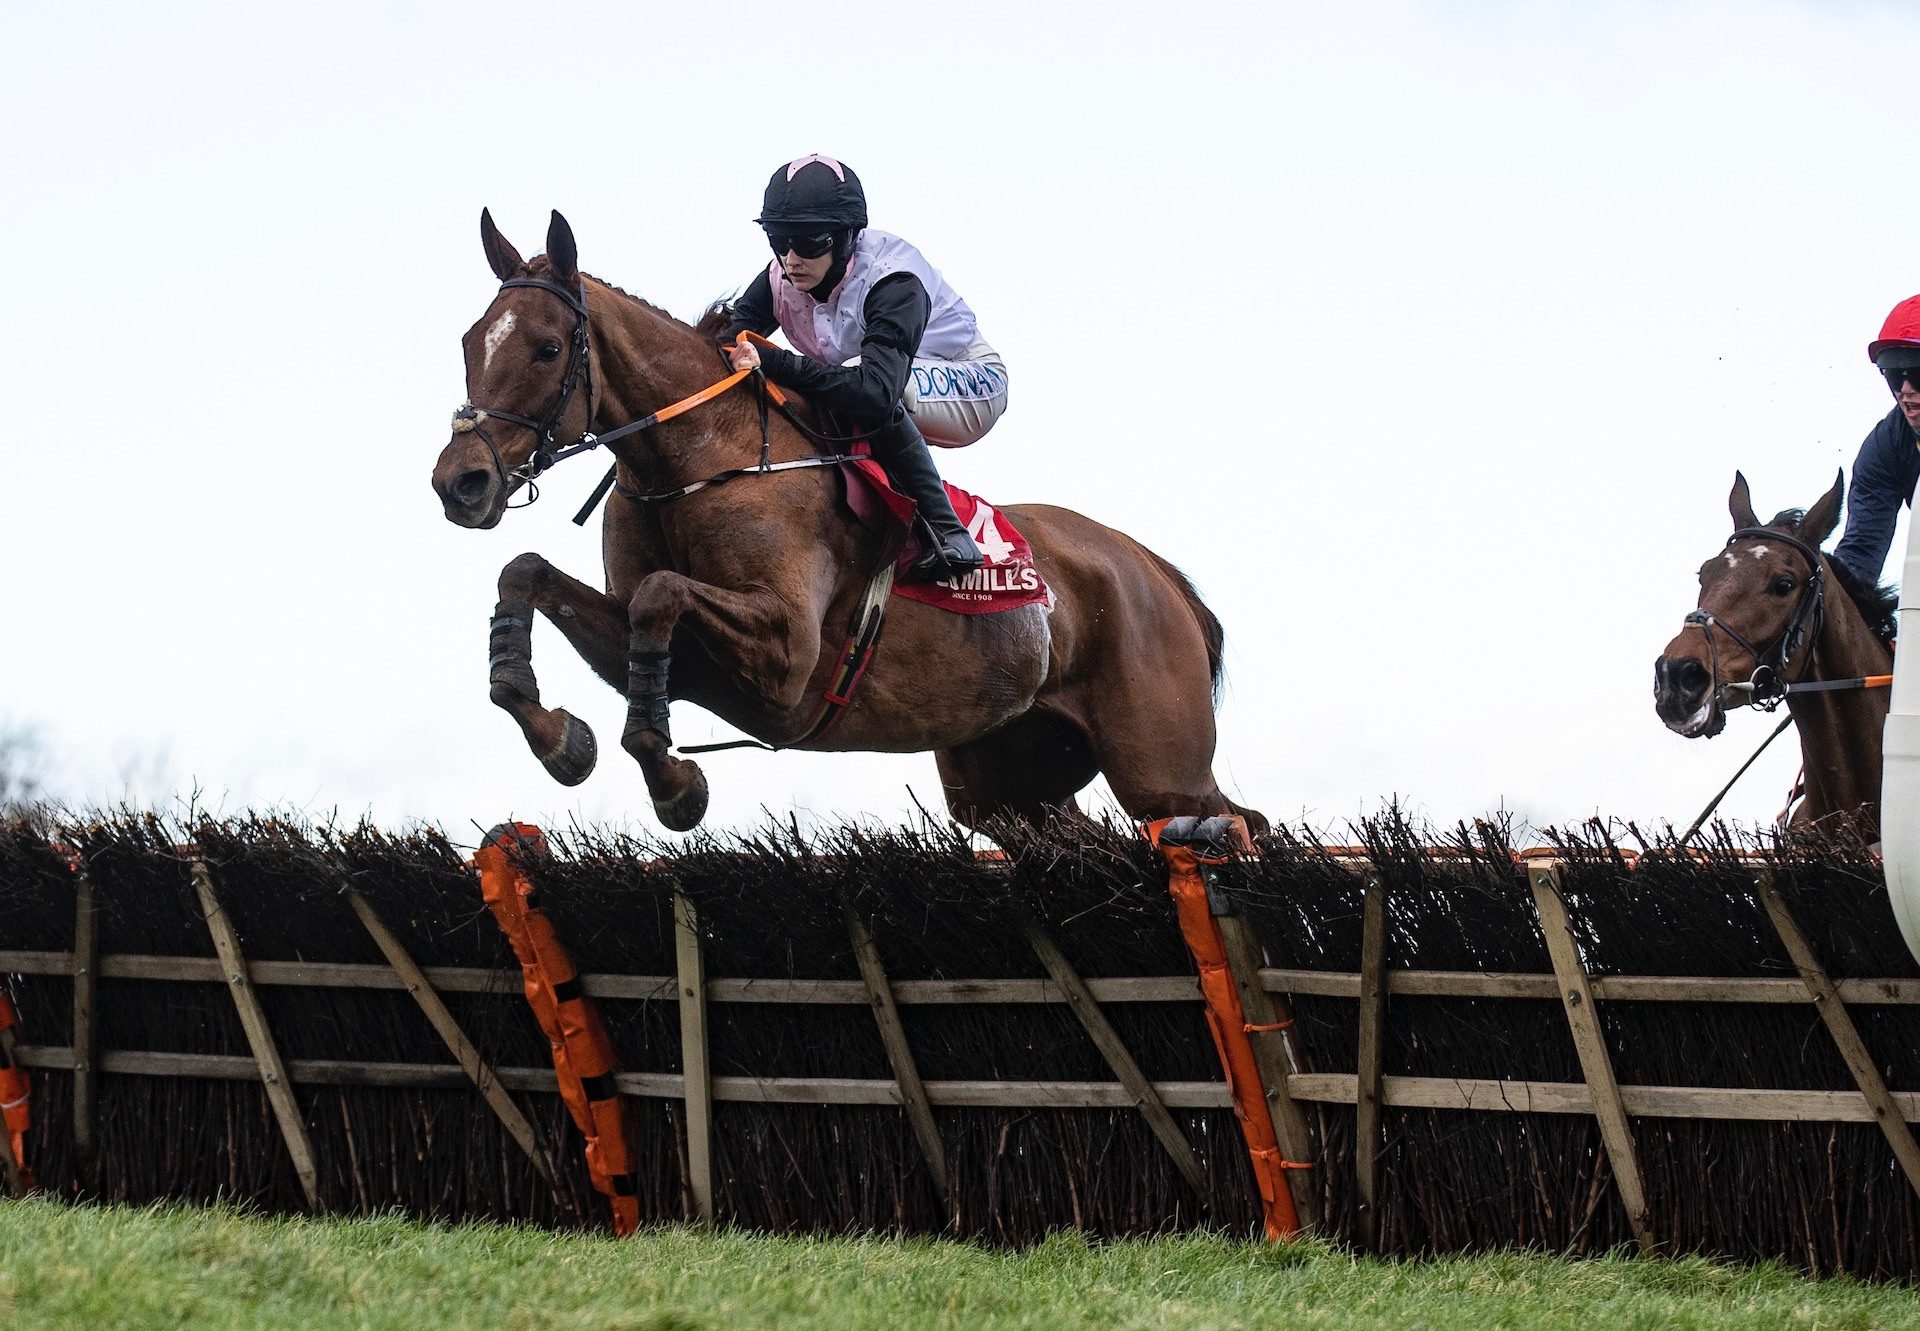 Journey With Me (Mahler) Extends His Unbeaten Record At Naas